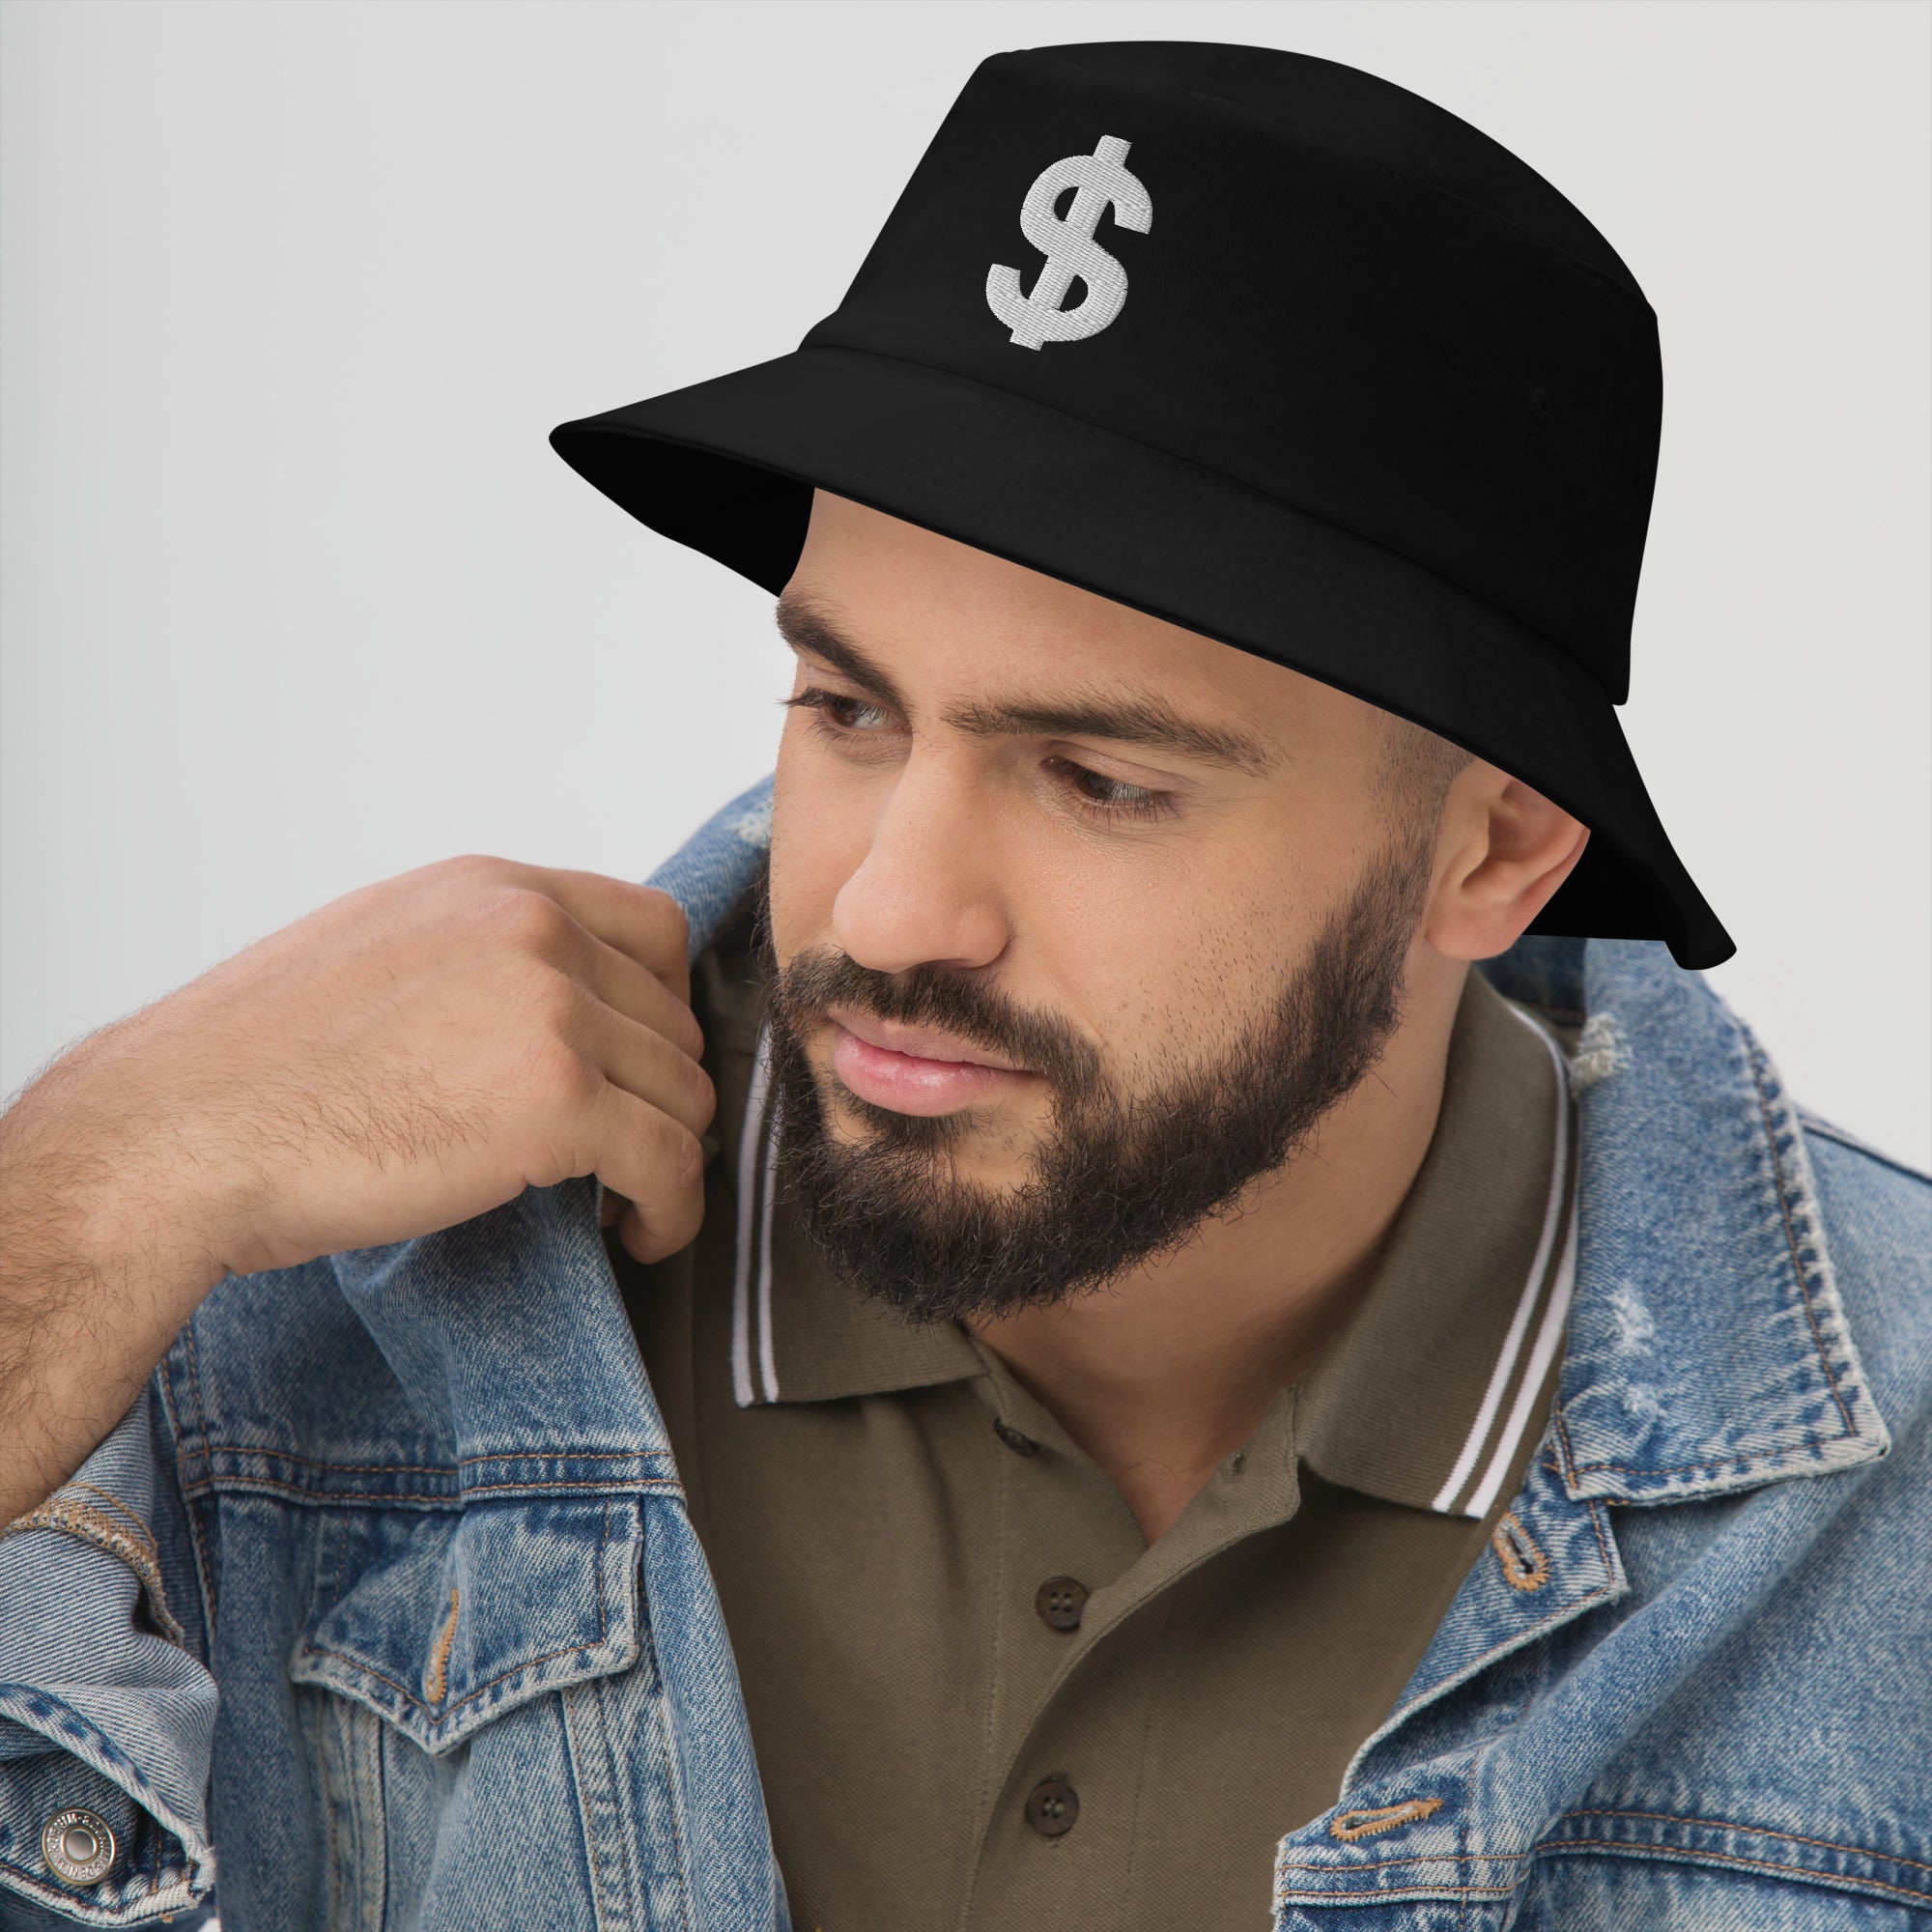 The Almighty US Dollar Sign Symbol of Money Embroidered Bucket Hat